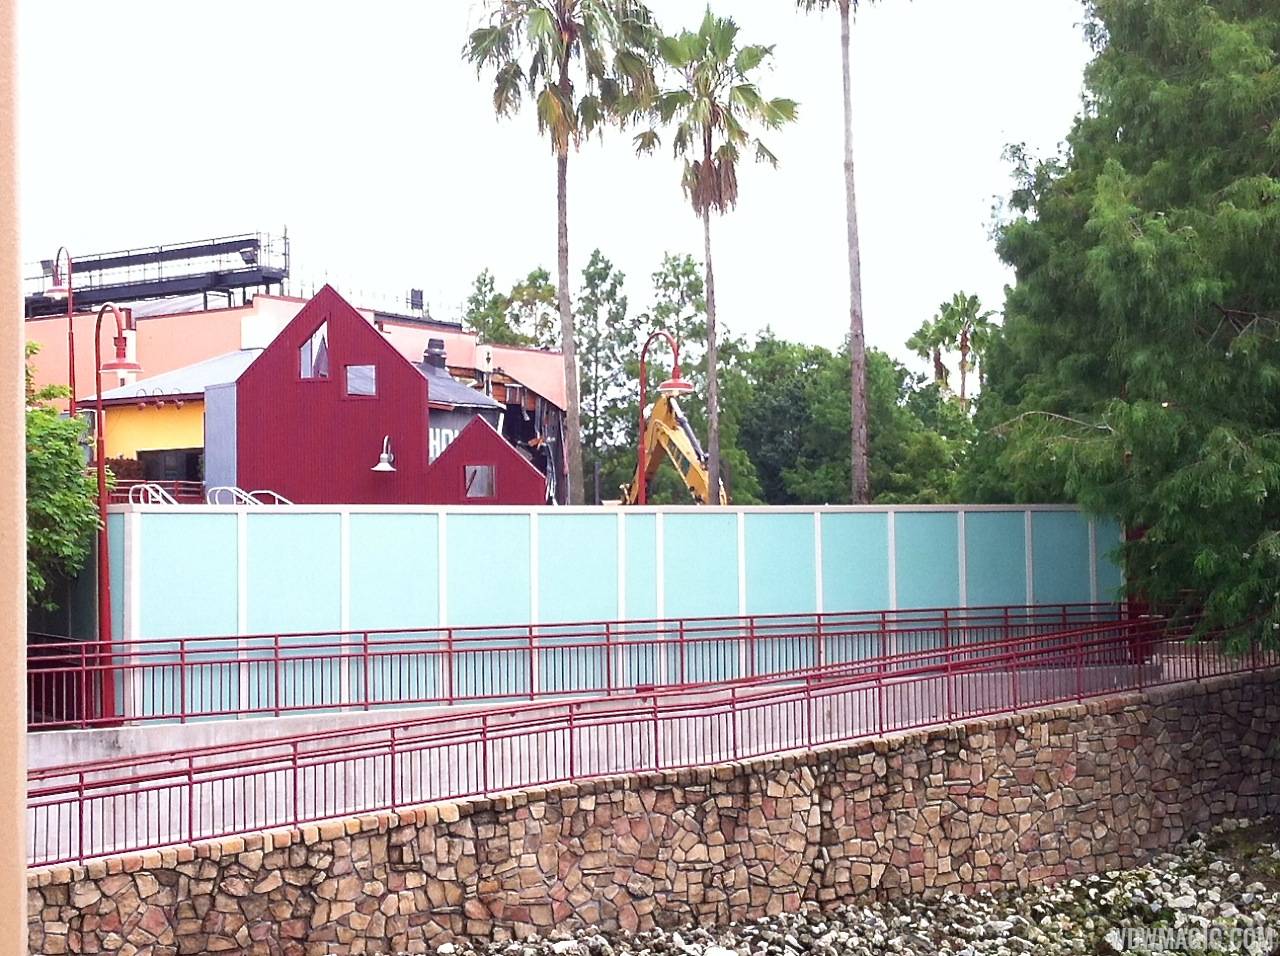 PHOTO - Comedy Warehouse demolition now underway at Downtown Disney